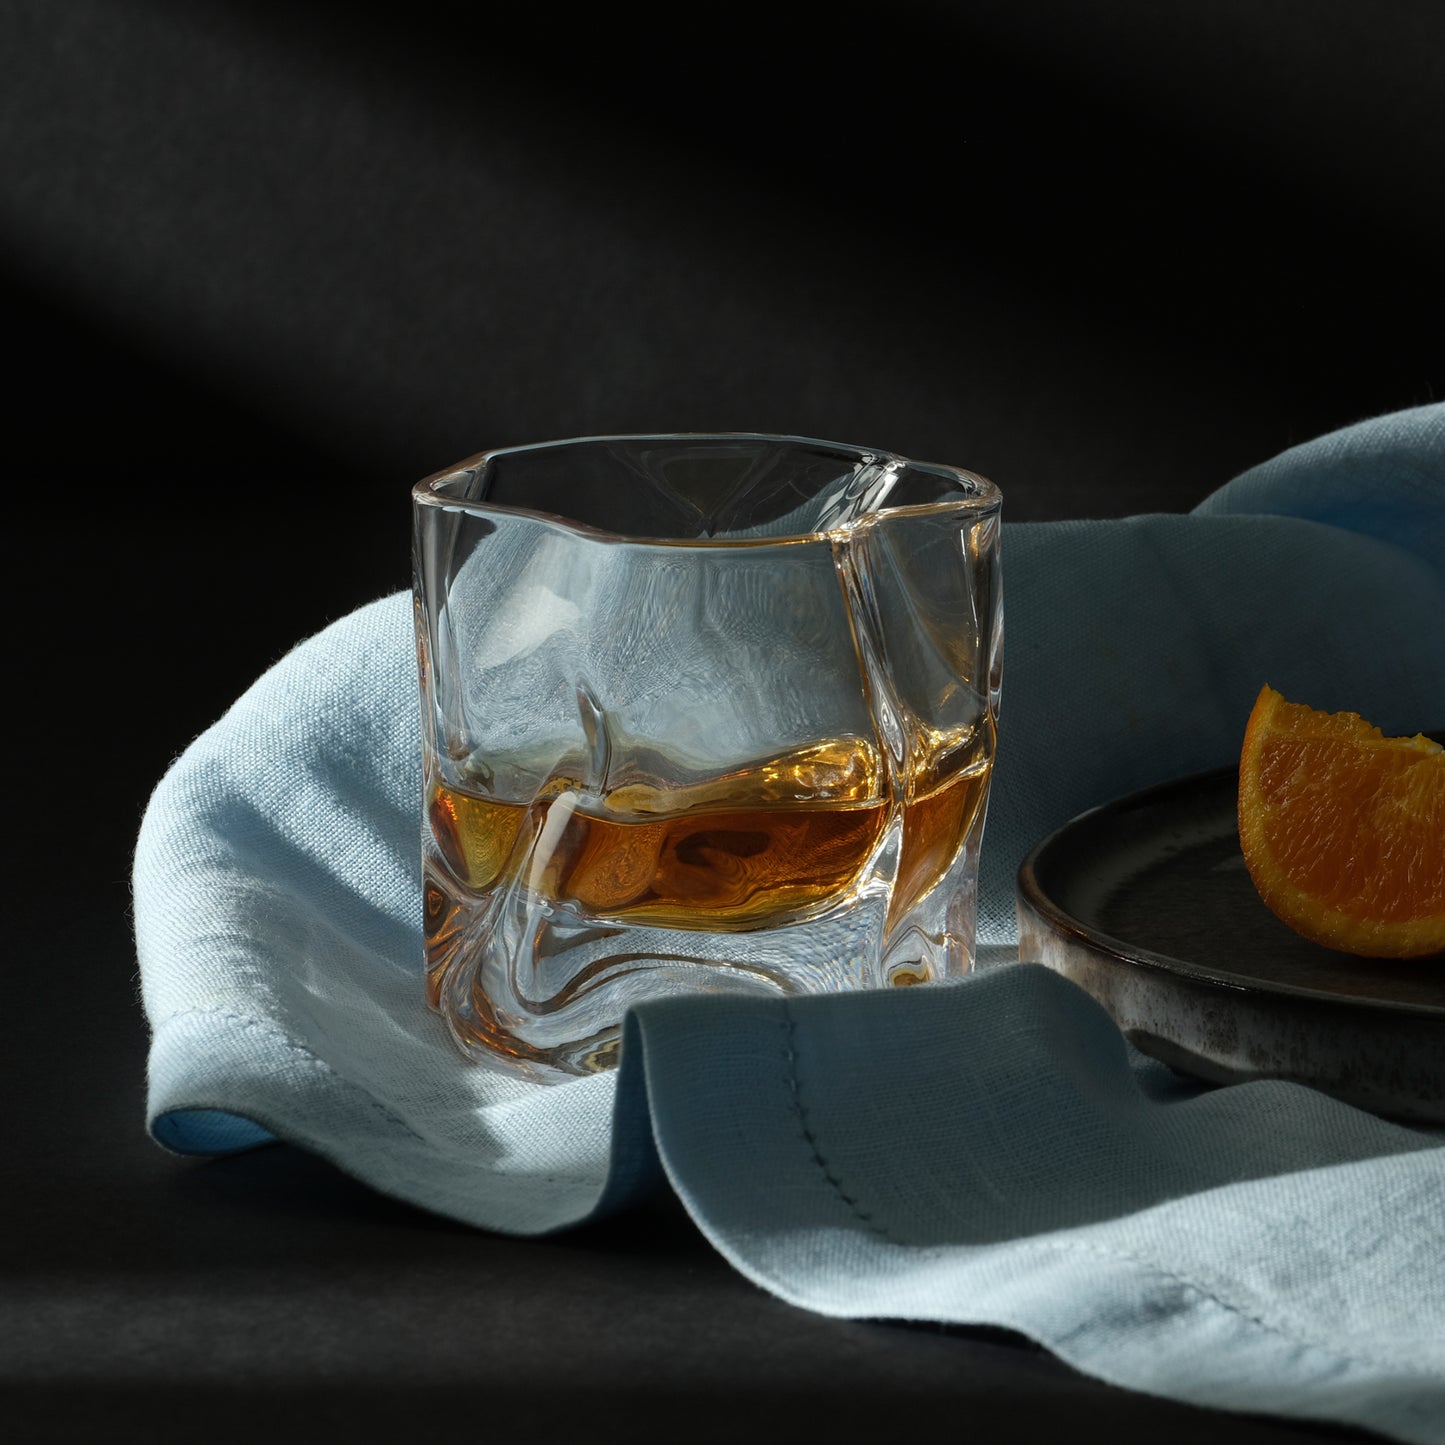 A Malt & Brew Whisky Wave Glass with a shot of whisky inside sits on a blue cloth.